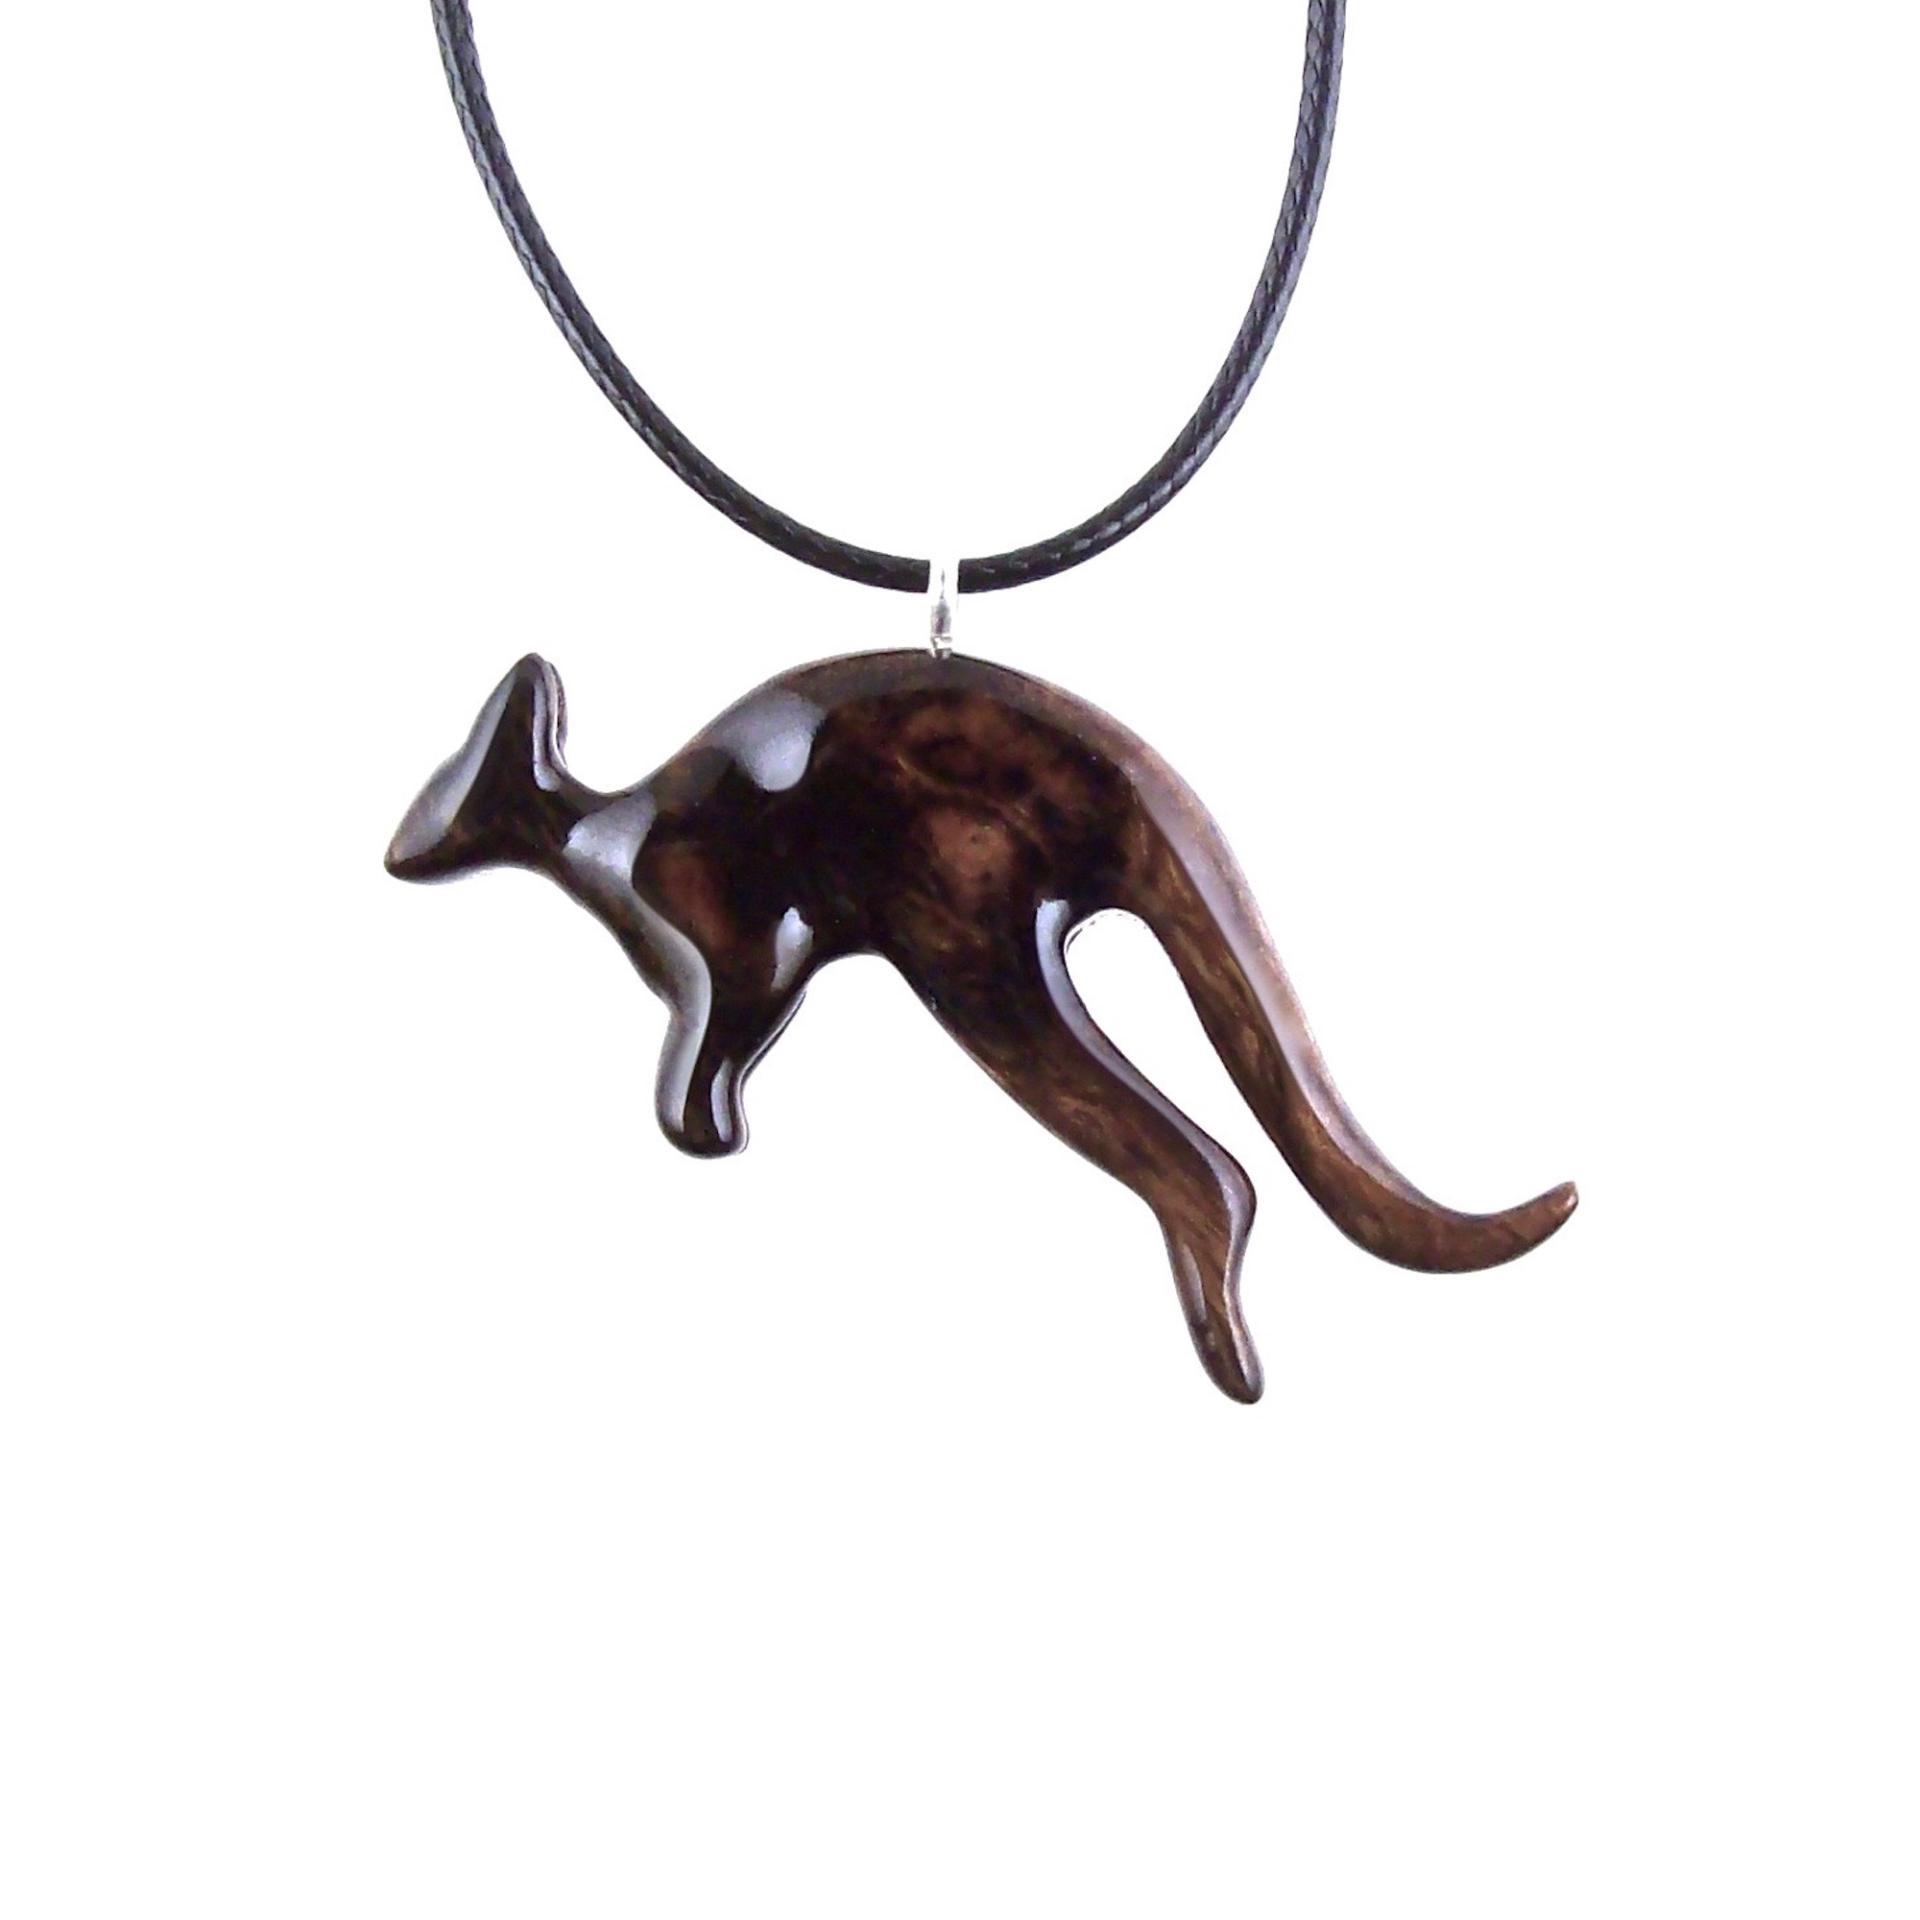 Kangaroo Necklace, Wooden Kangaroo Pendant, Hand Carved Wood Necklace, Totem Spirit Animal Jewelry, Gift for Him Her